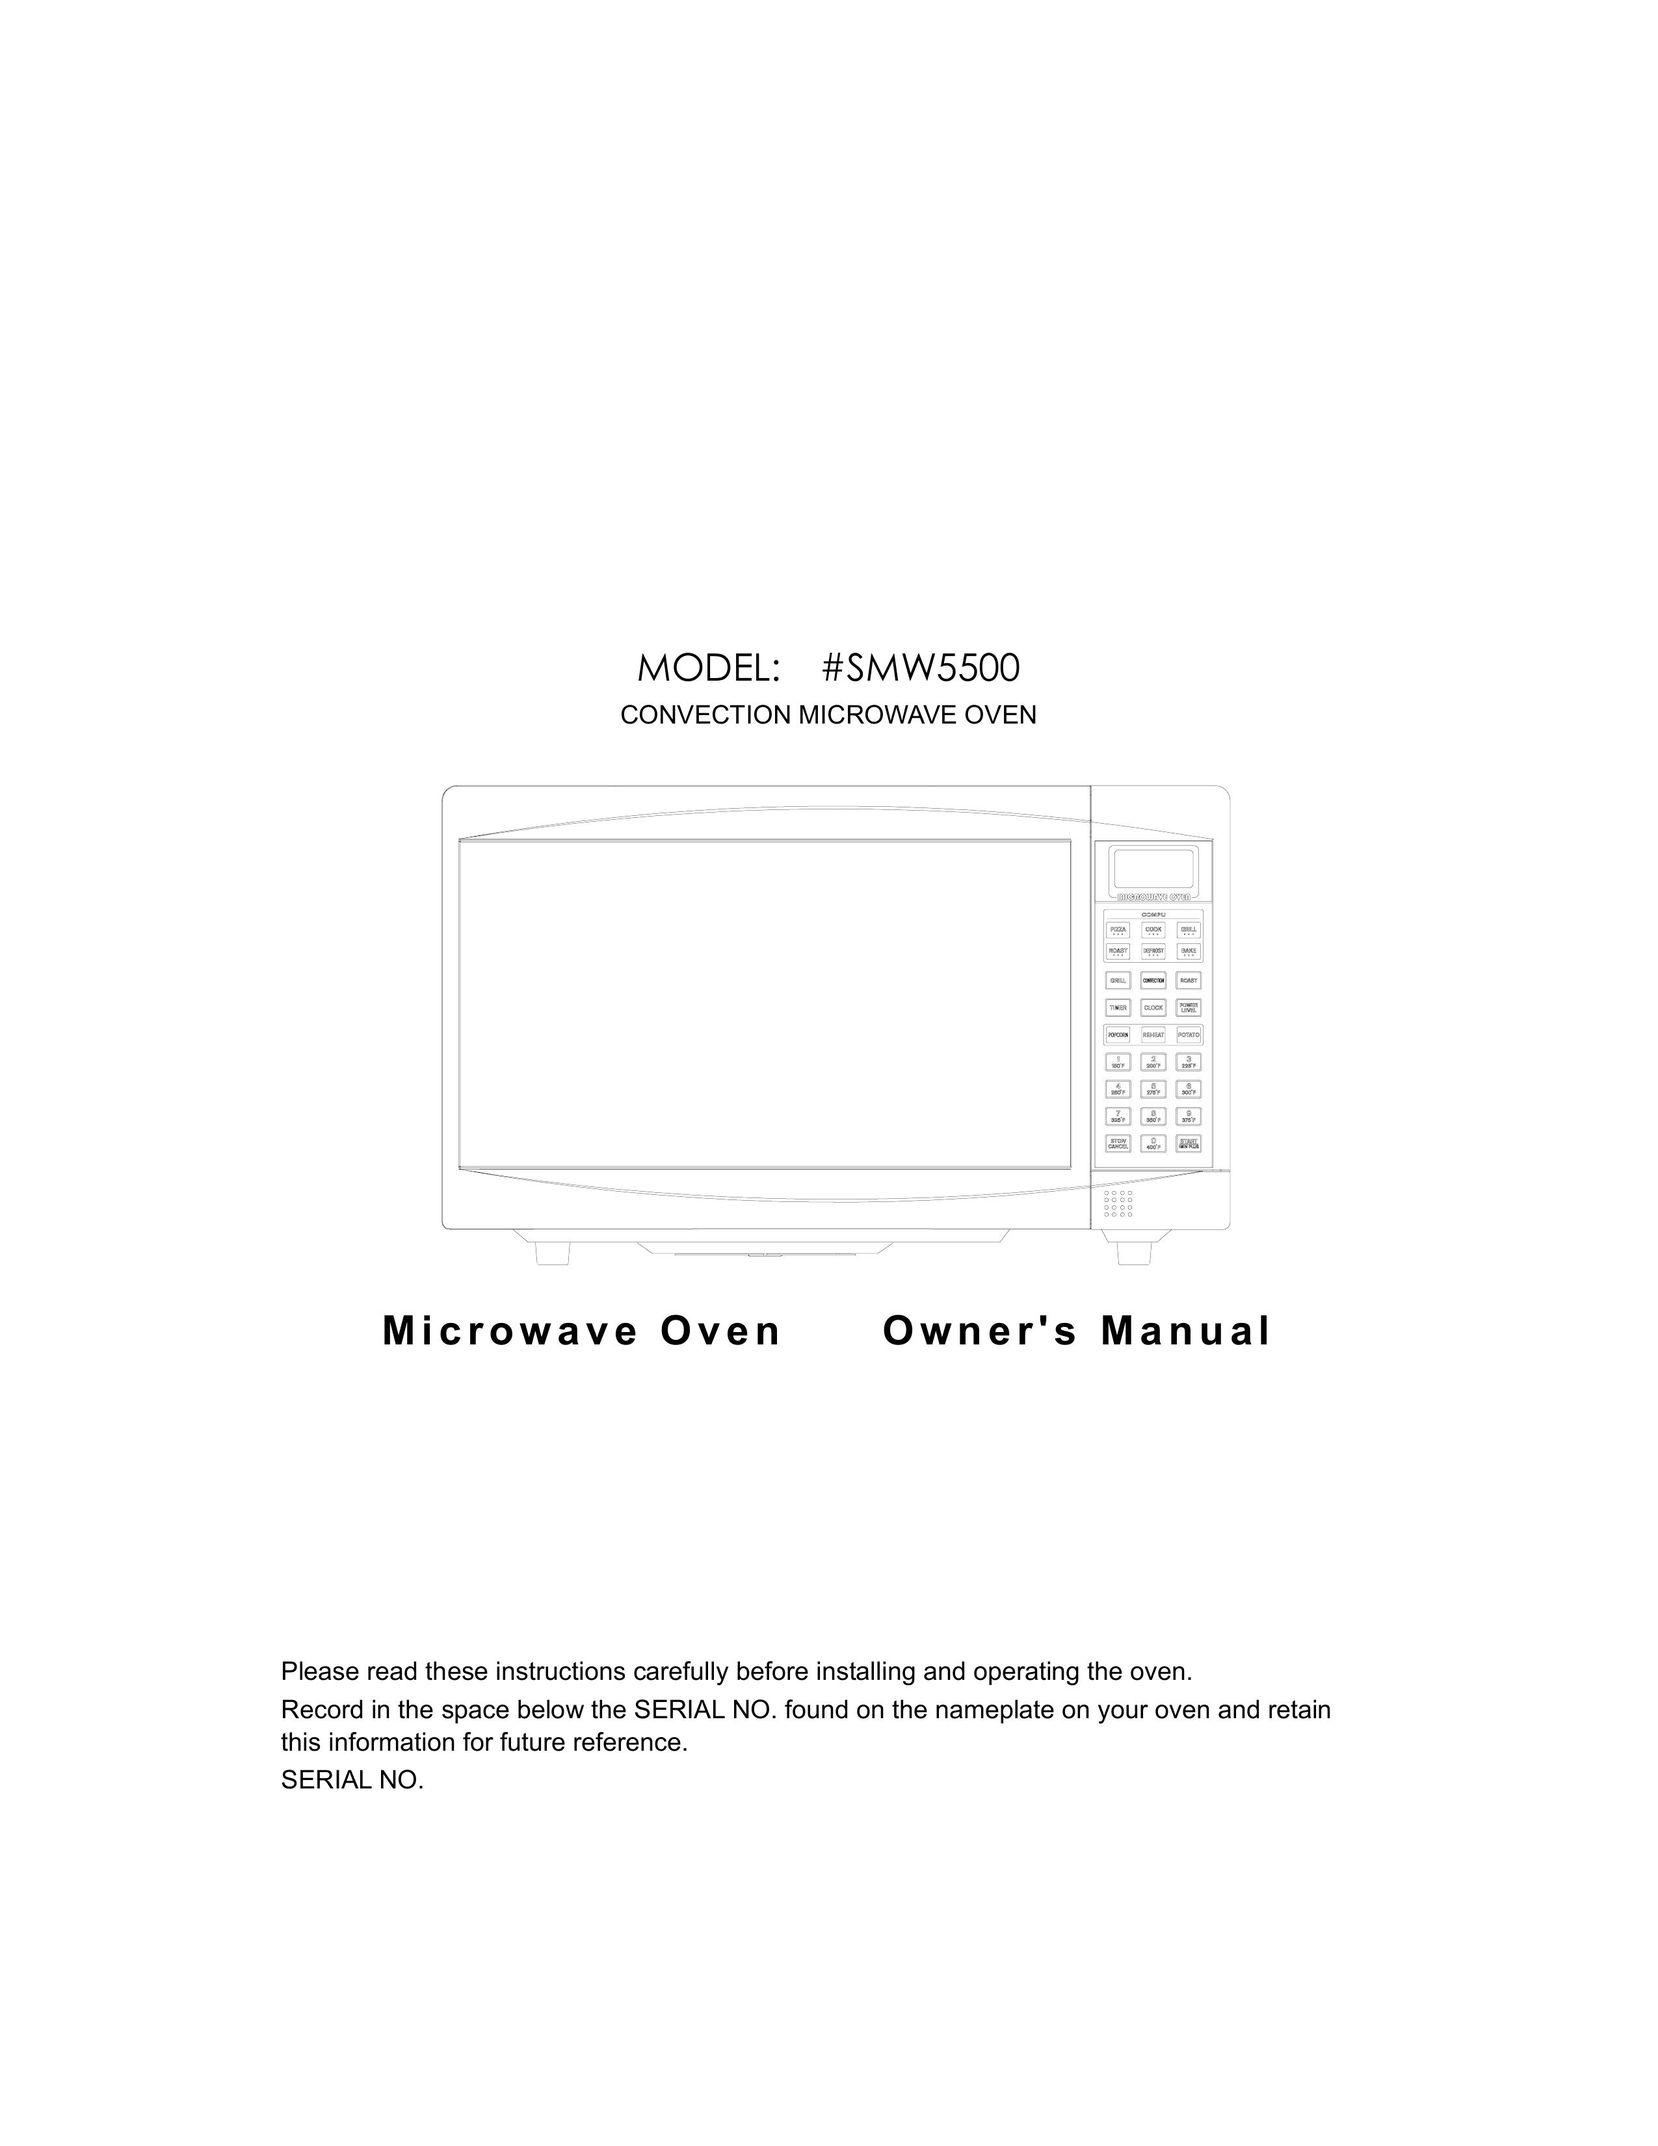 Curtis SMW5500 Microwave Oven User Manual